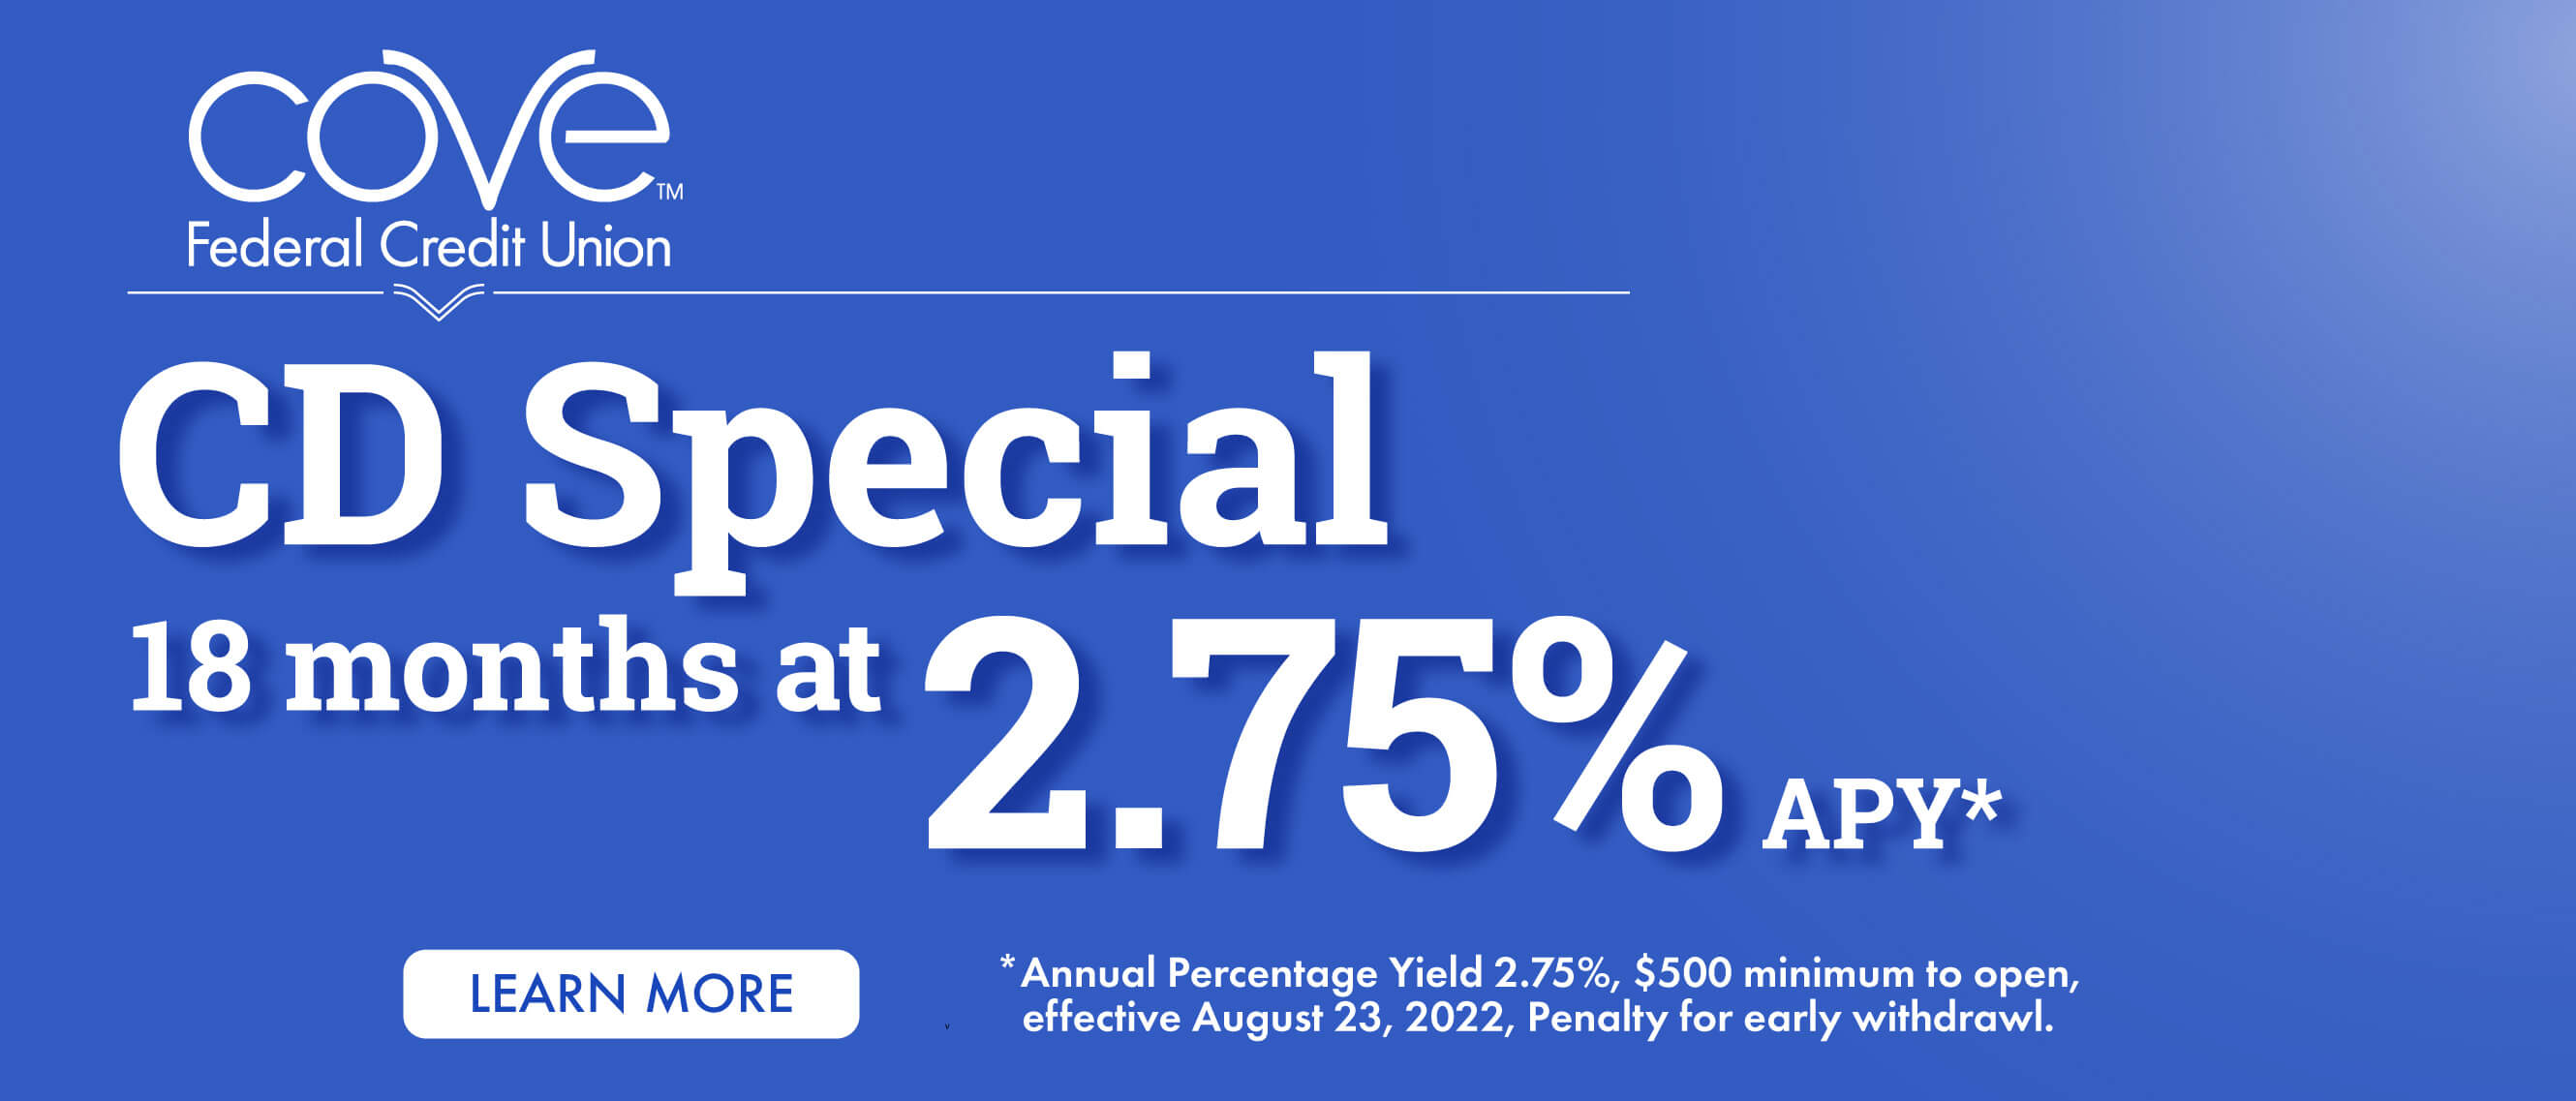 CD SPECIAL 2.75% AYP